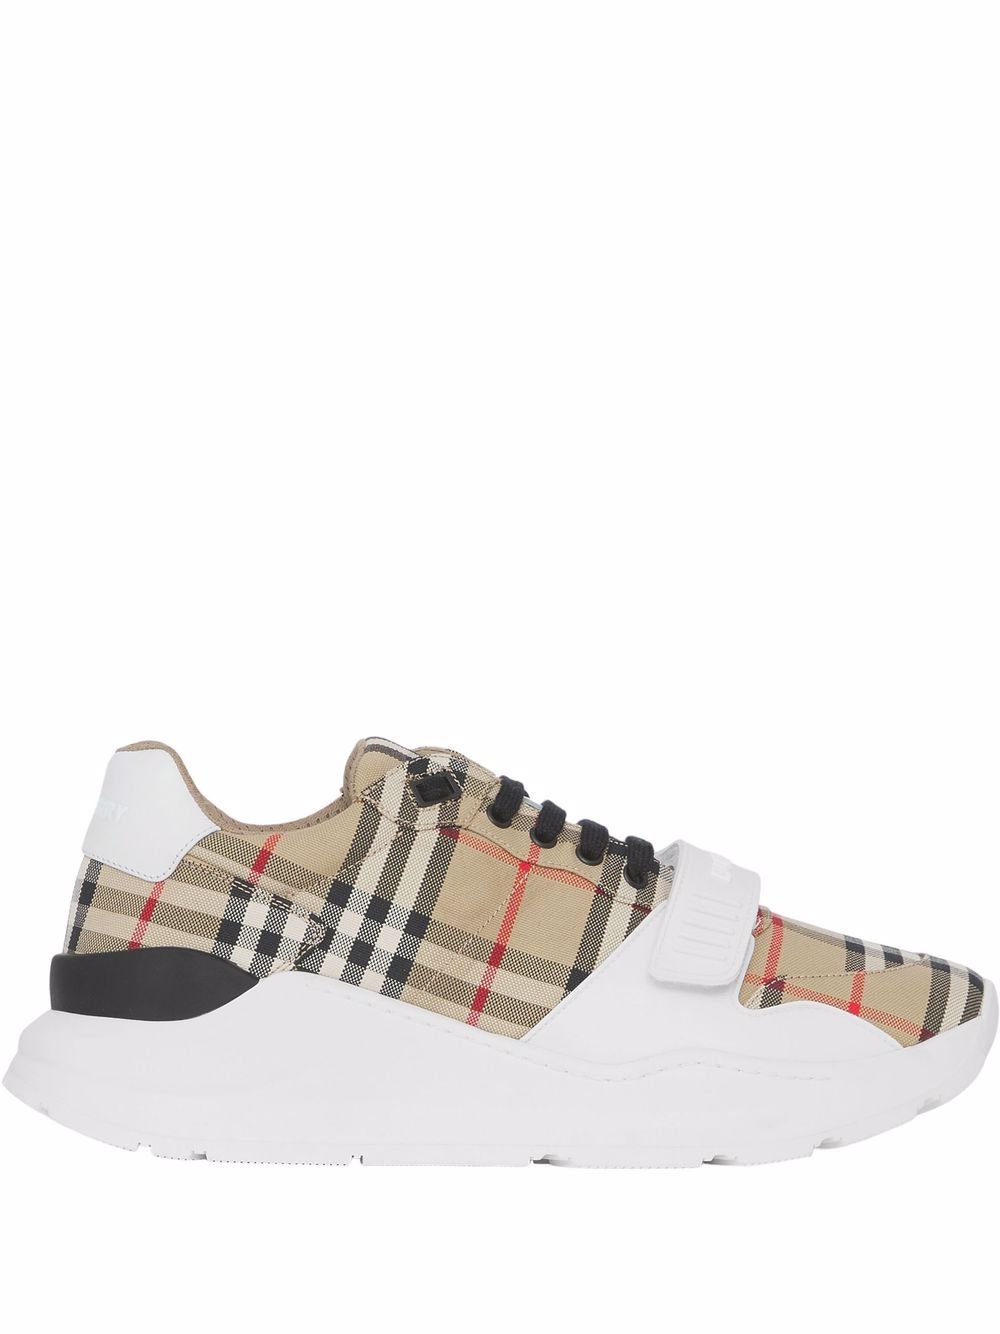 Burberry Organic Cotton Beige And White Check Pattern Low-top Sneaker For Men